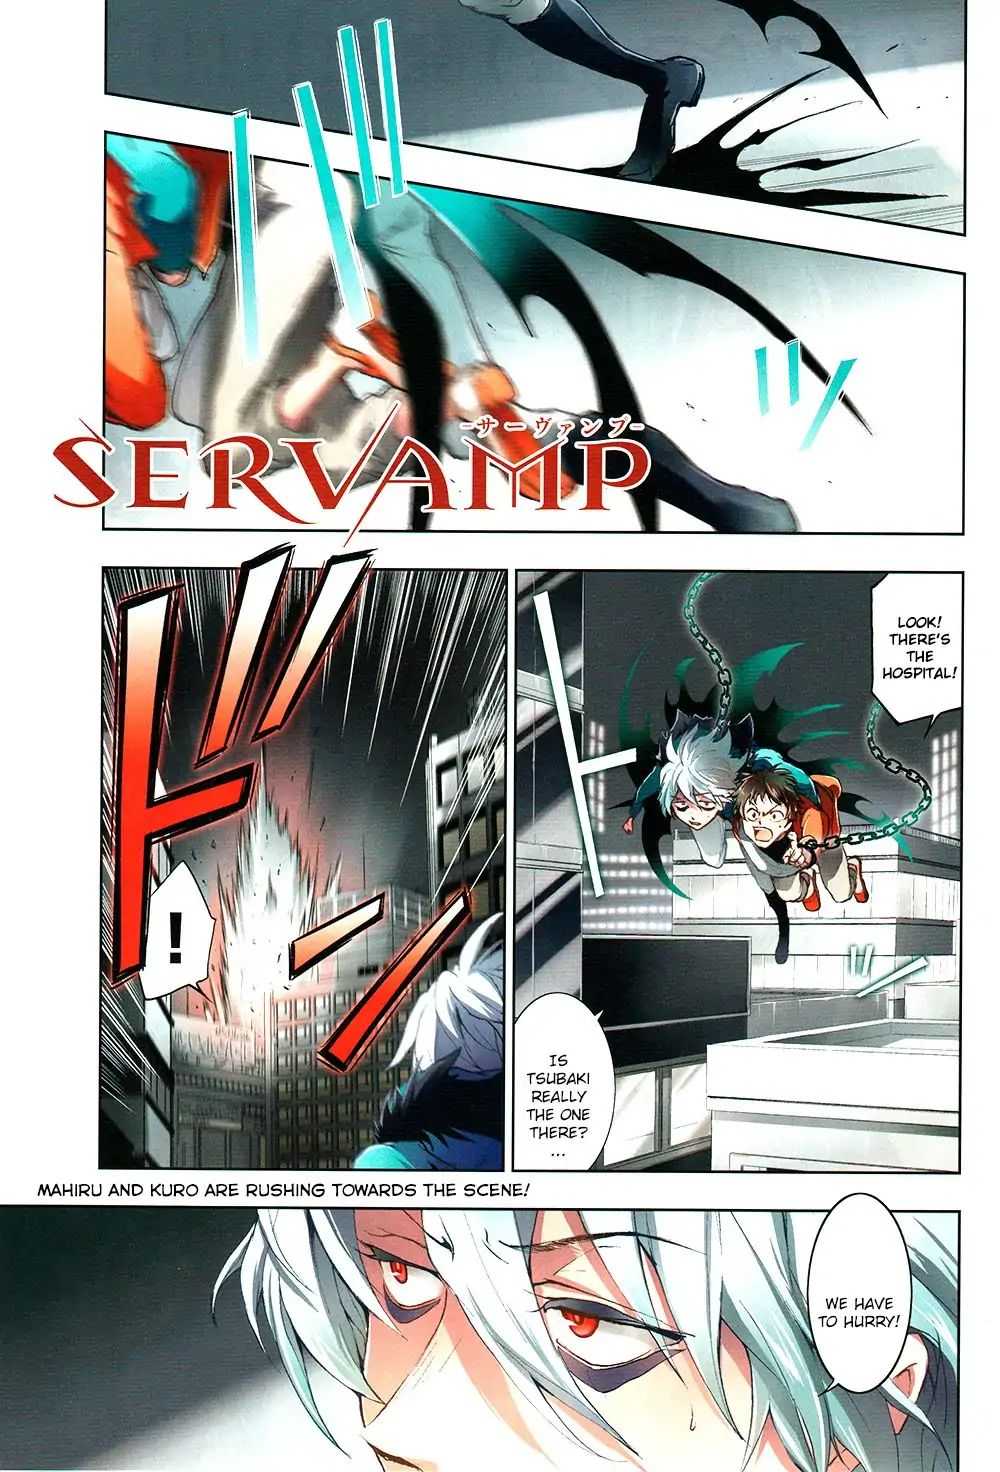 Servamp Vol.13 Chapter 85 - Picture 1